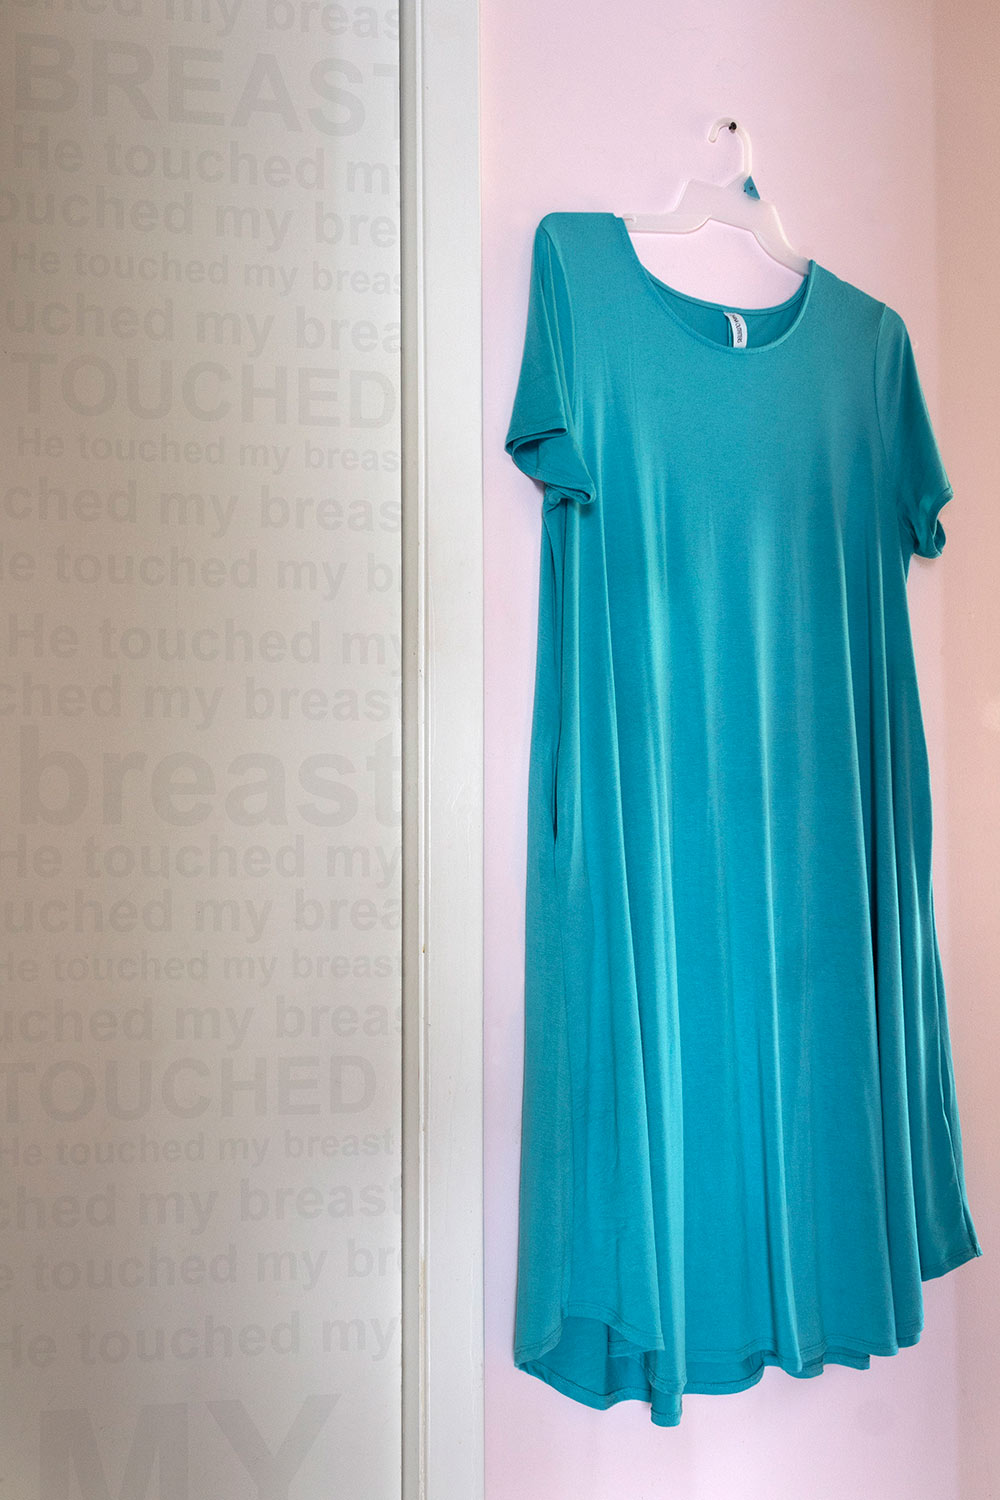 green dress on hanger - "He touched my breast" written on wall to left